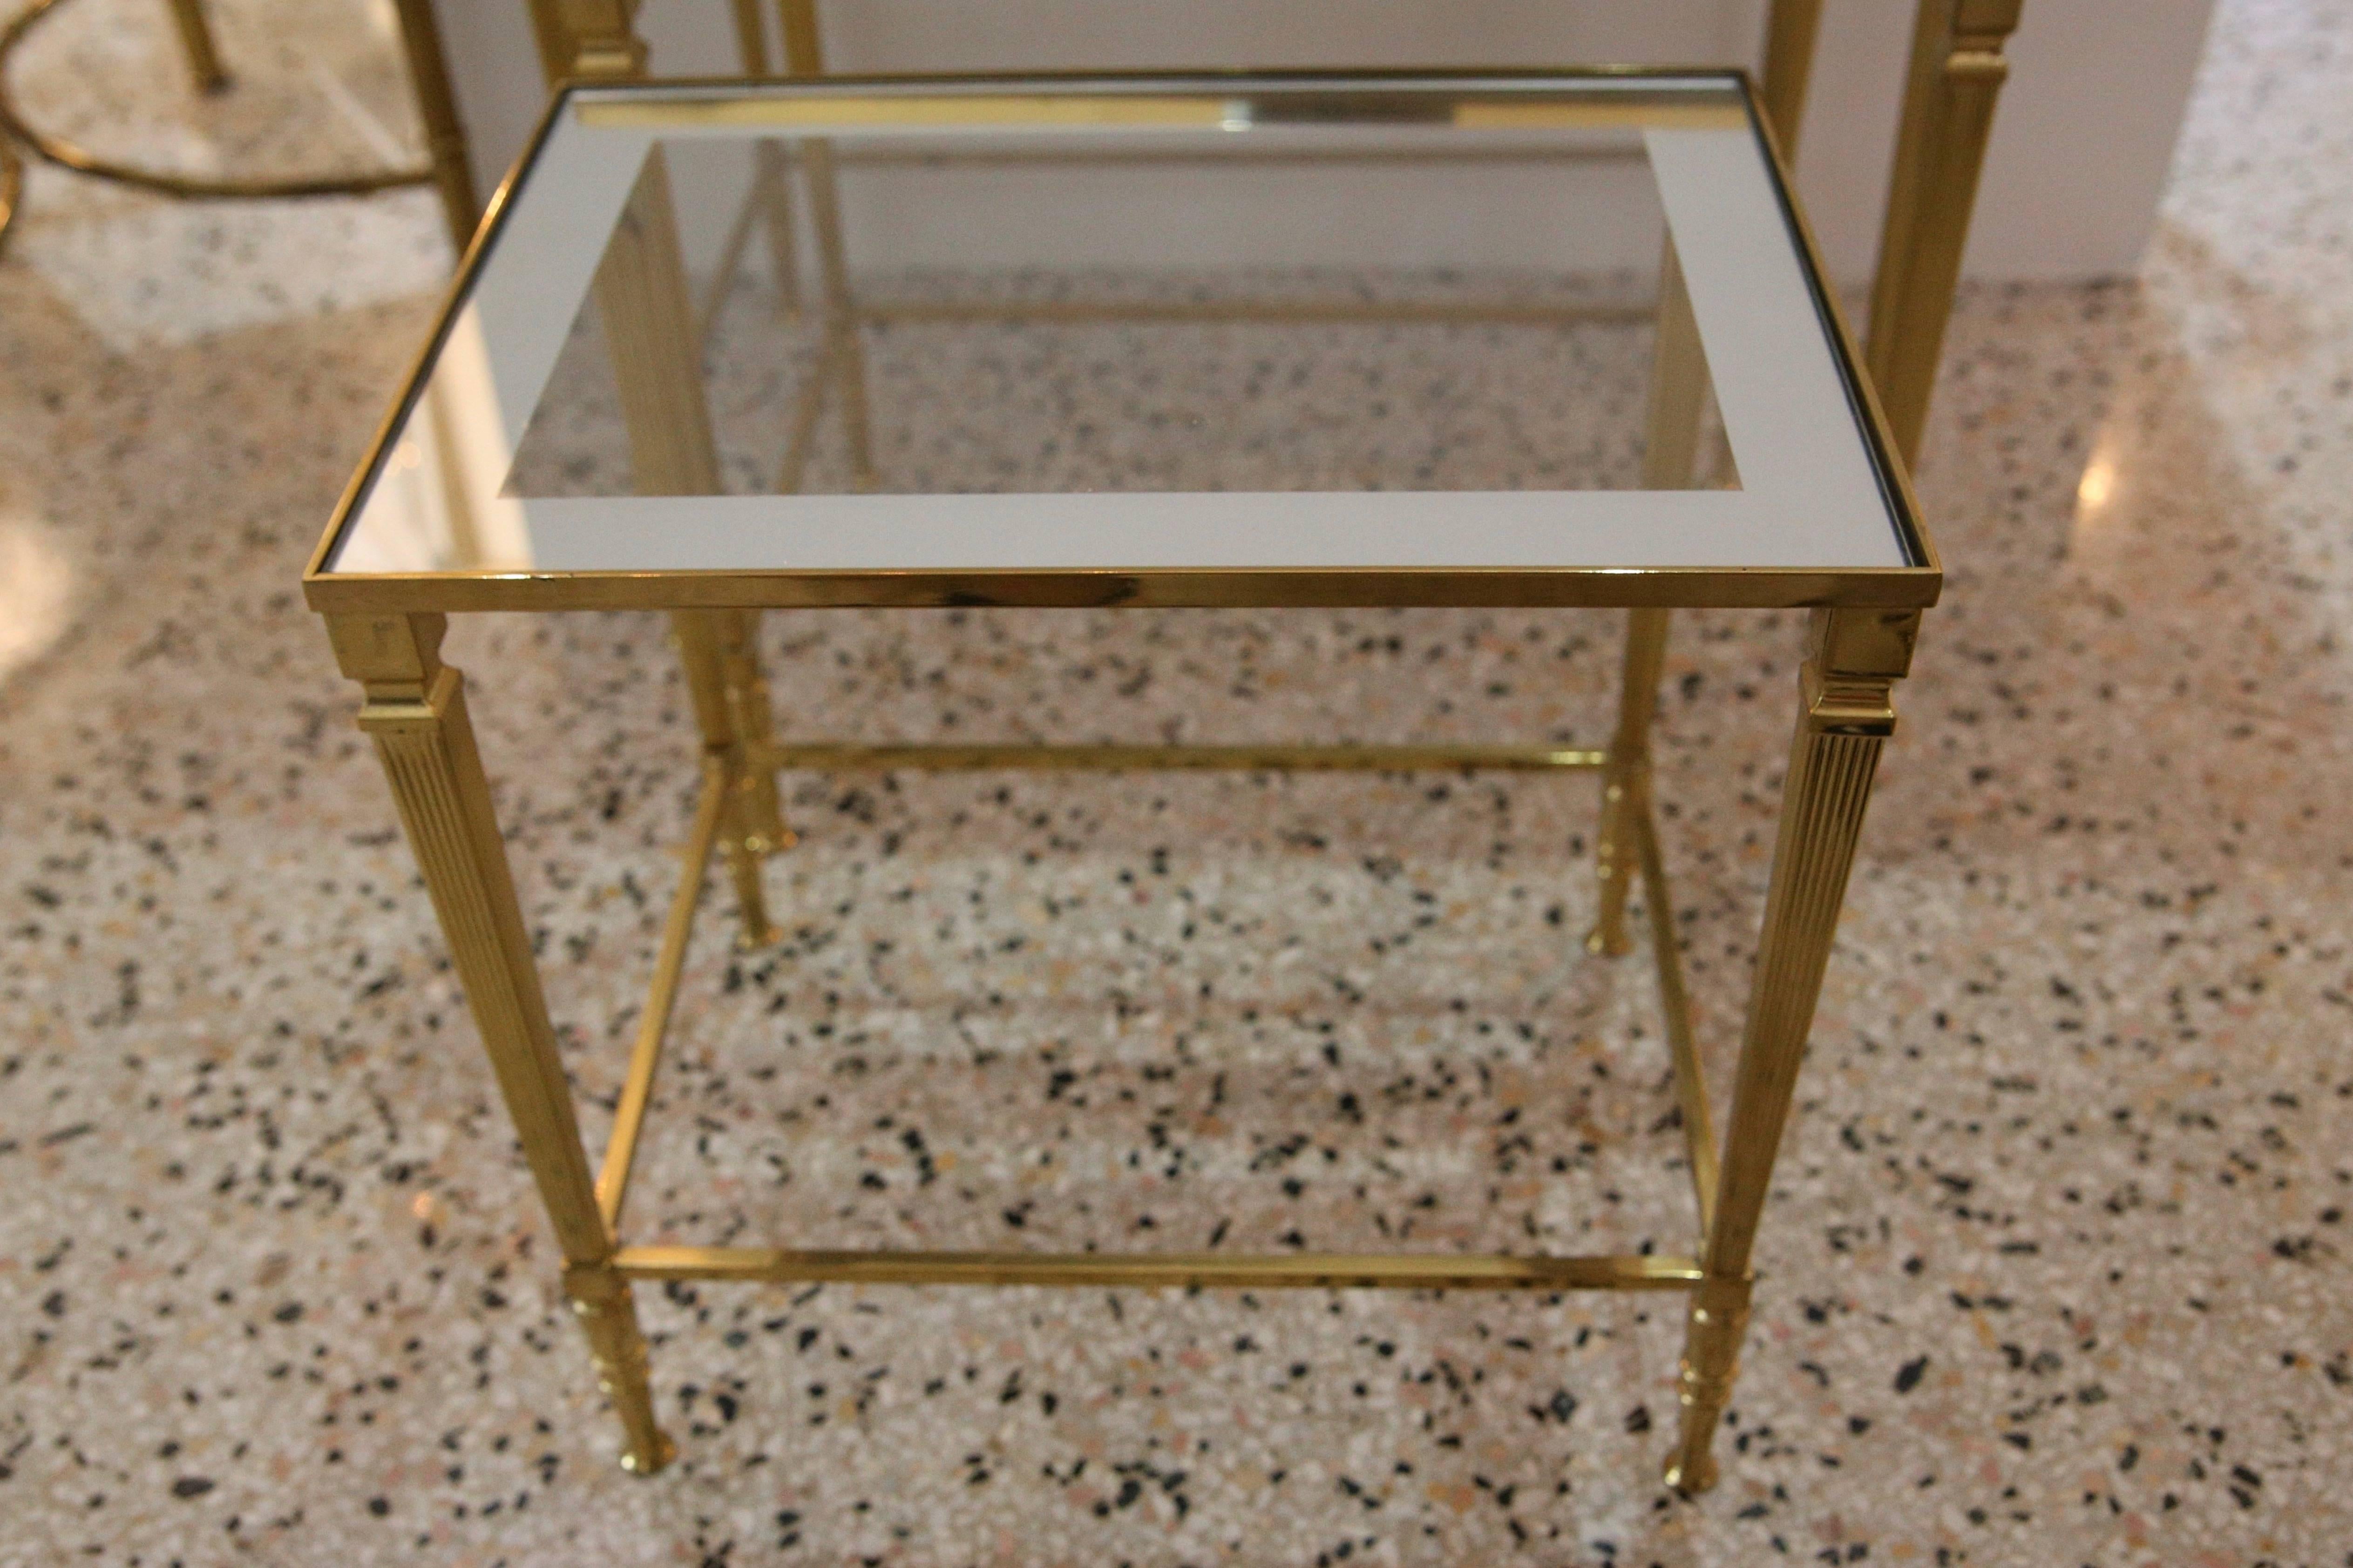  Nesting Tables in Brass, Glass and Mirror 2